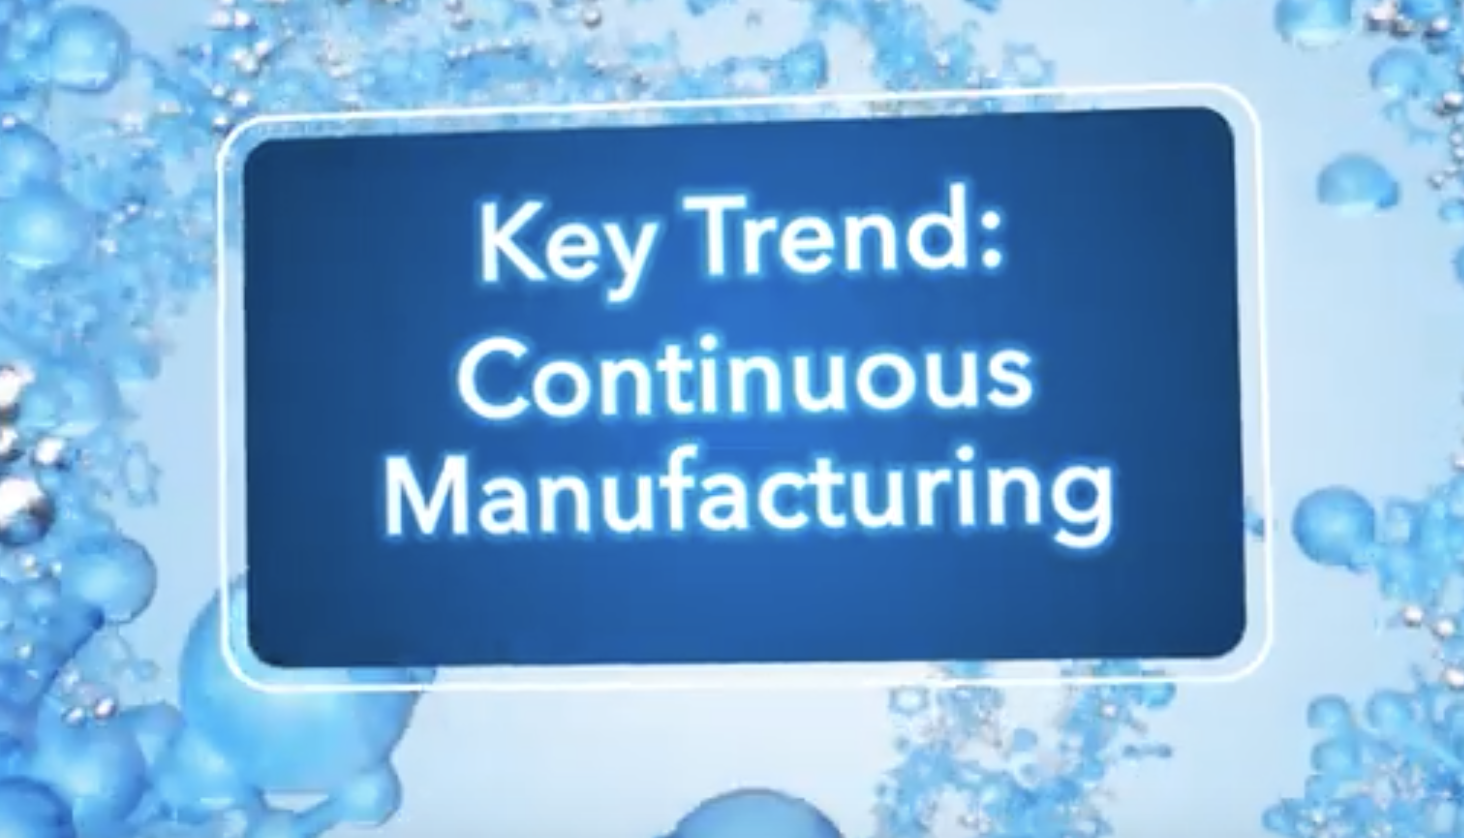 Key trend continuous manufacturing